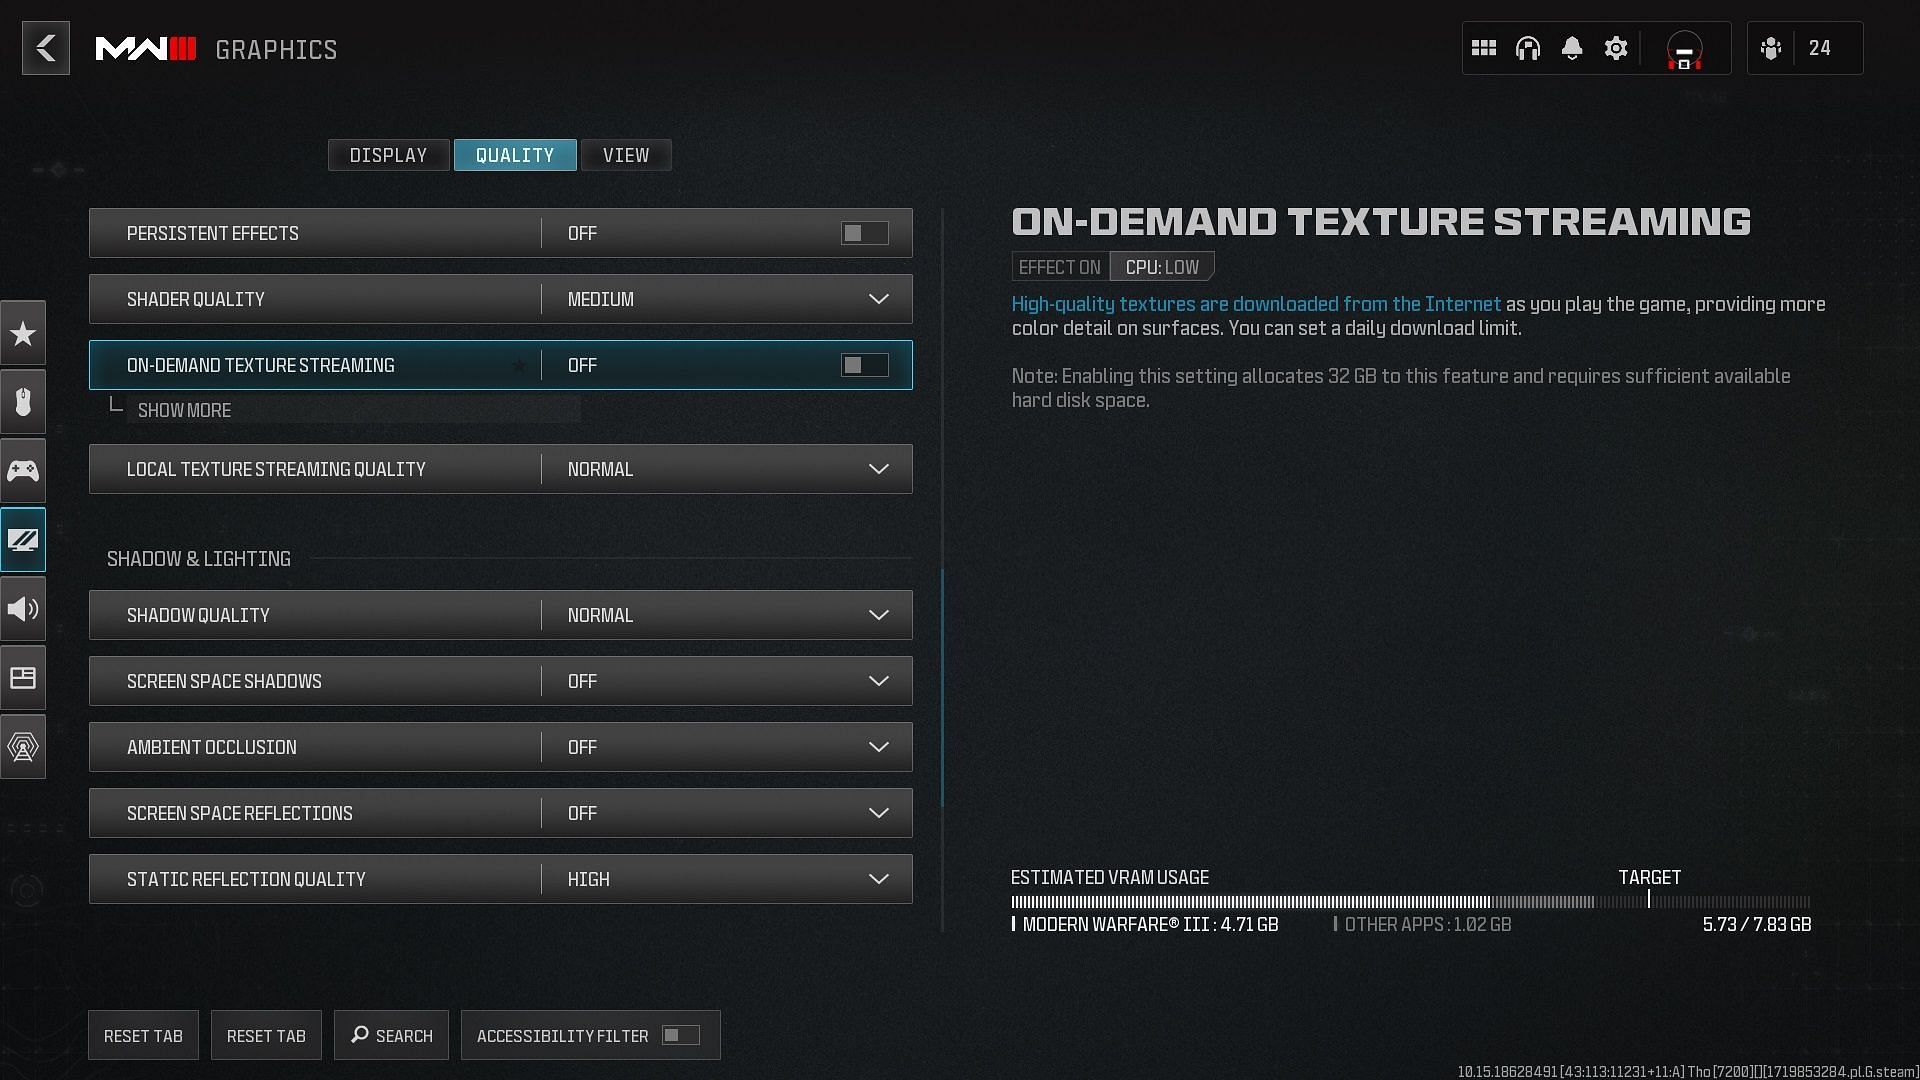 Turning off On-Demand Texture Streaming in Modern Warfare 3 (Image via Activision)